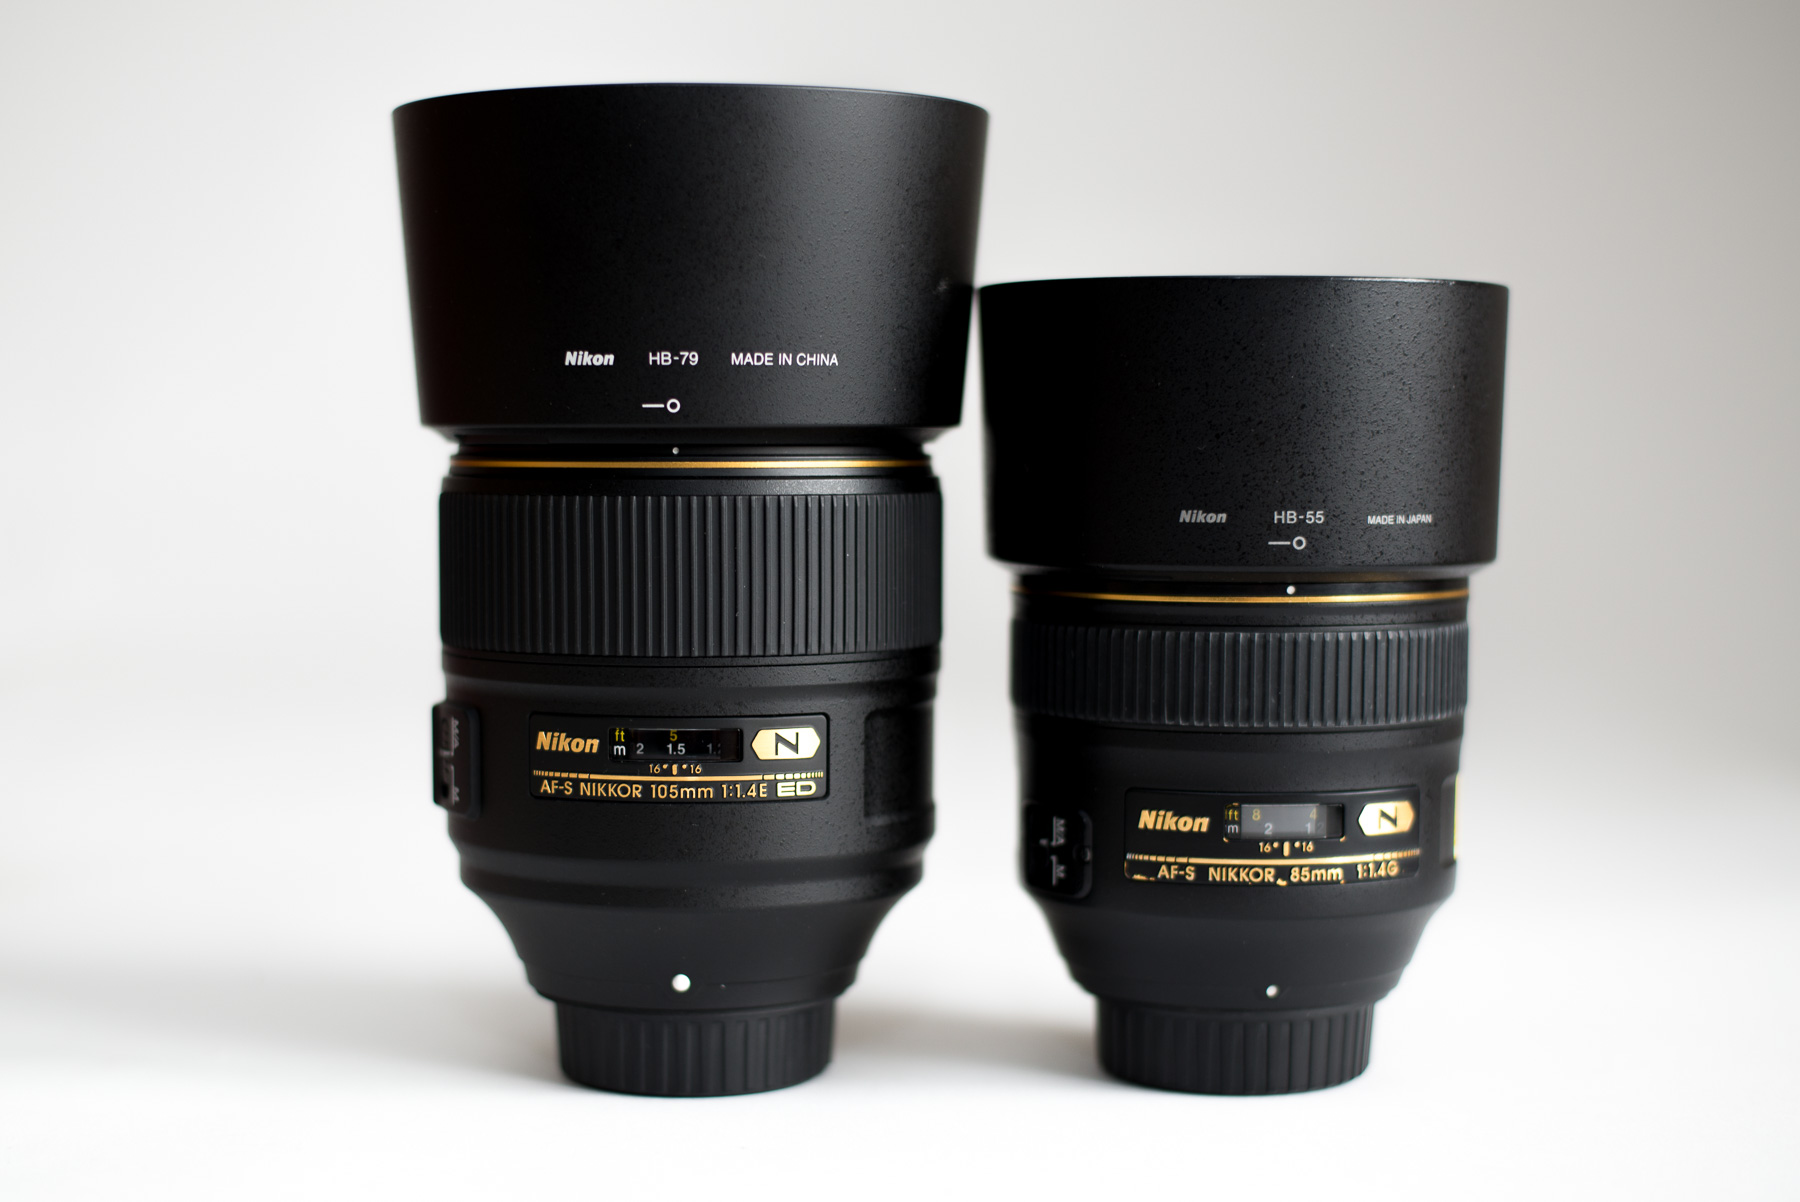 Nikon AF-S Nikkor 105mm f/1.4E ED review and comparison with the